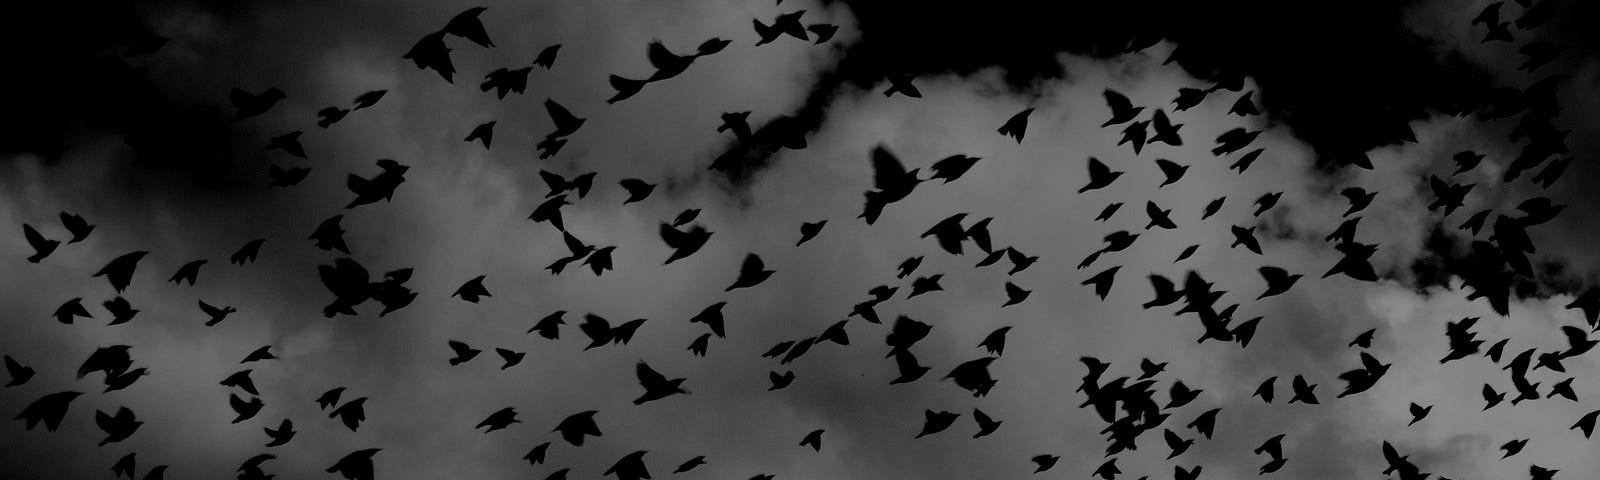 Silhouettes of birds flying, black and white.